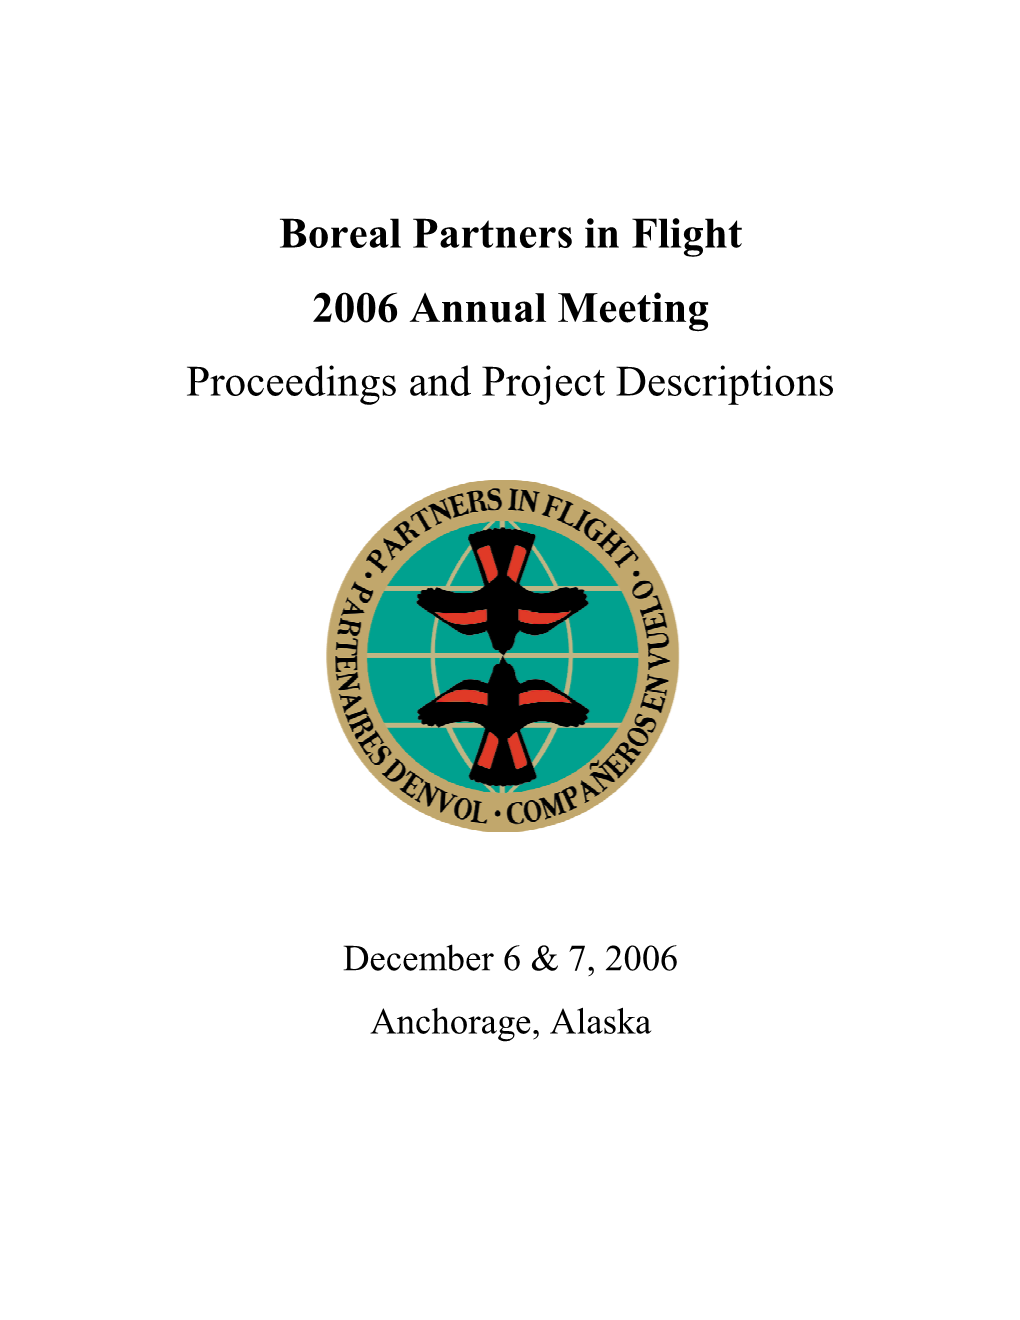 Boreal Partners in Flight 2006 Annual Meeting Proceedings and Project Descriptions